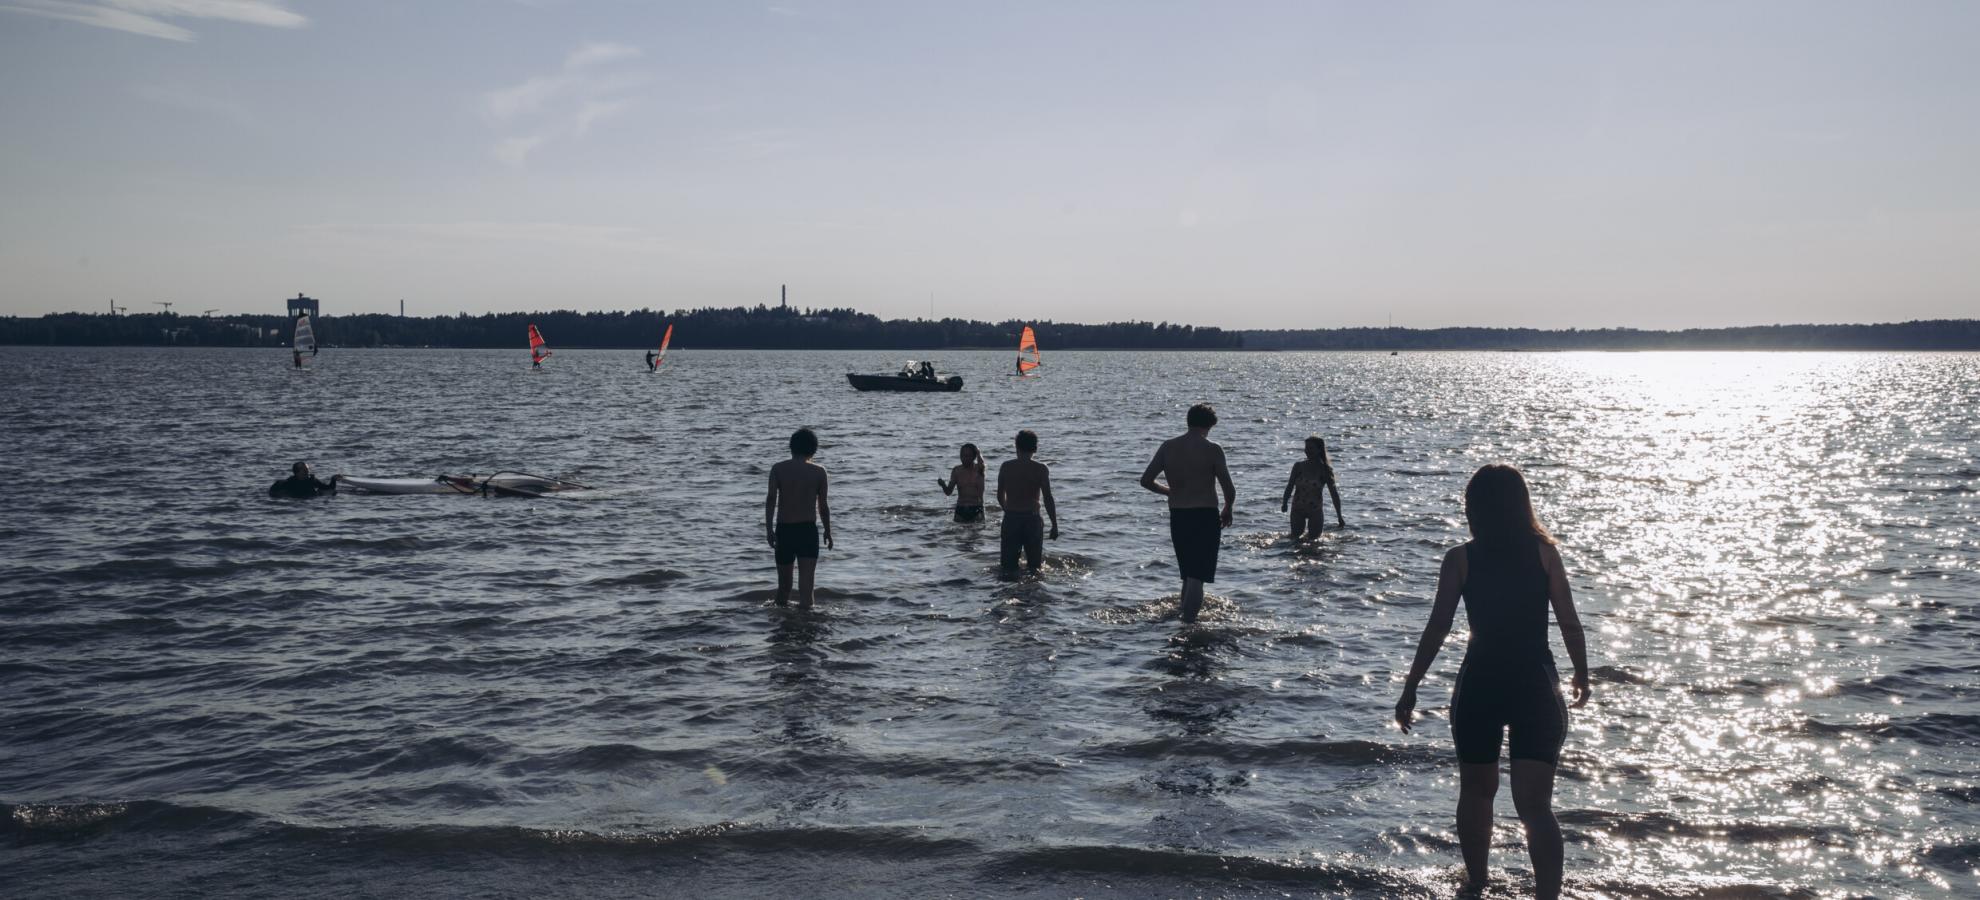 On a warm summer's day, sun glaring off the sea, a small group of people wade out into the water from the beach at Kasinonpuisto. The Servinniemi shoreline can be seen in the distance.